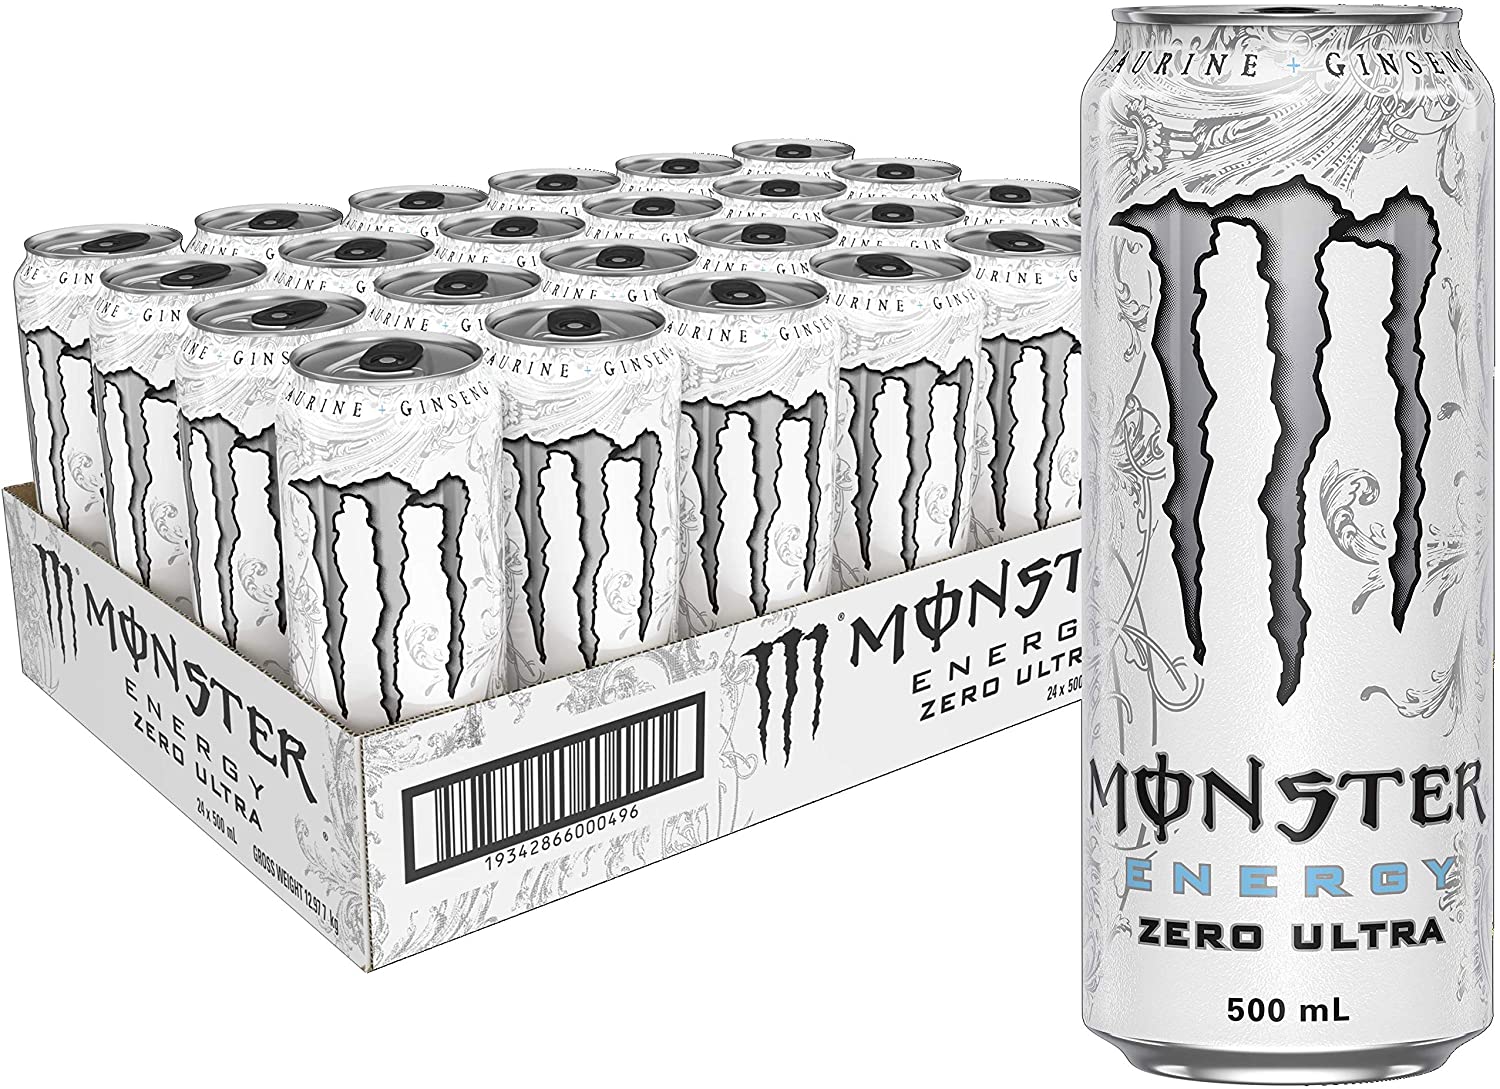 Buy Monster Energy Drink 24 x 500mL -best price deal- save 45% OFF now $39 + free shipping